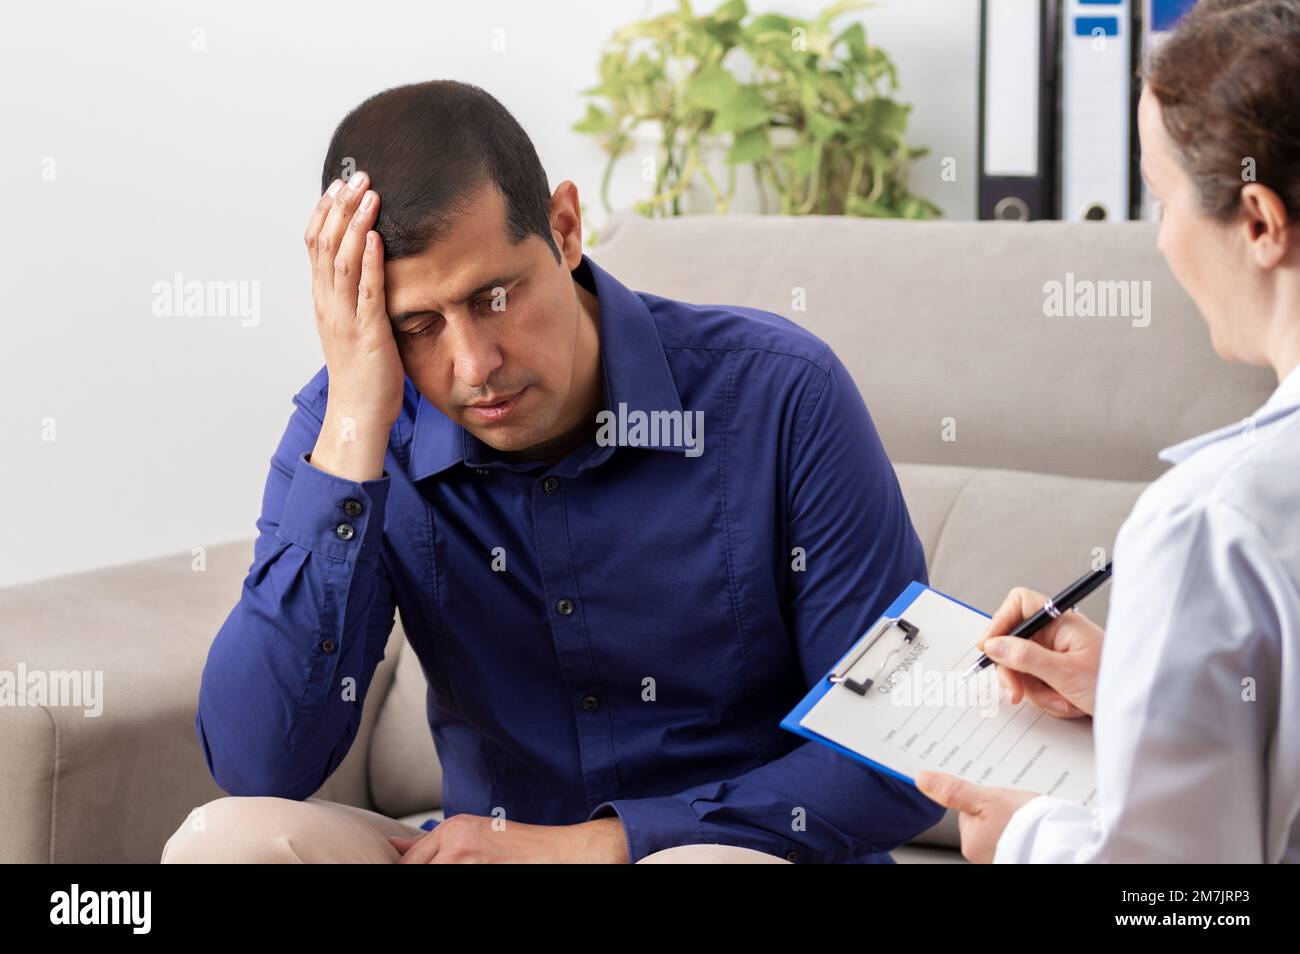 Distraught businessman holds his head in his hands while speaking to a healthcare professional. Stock Photo